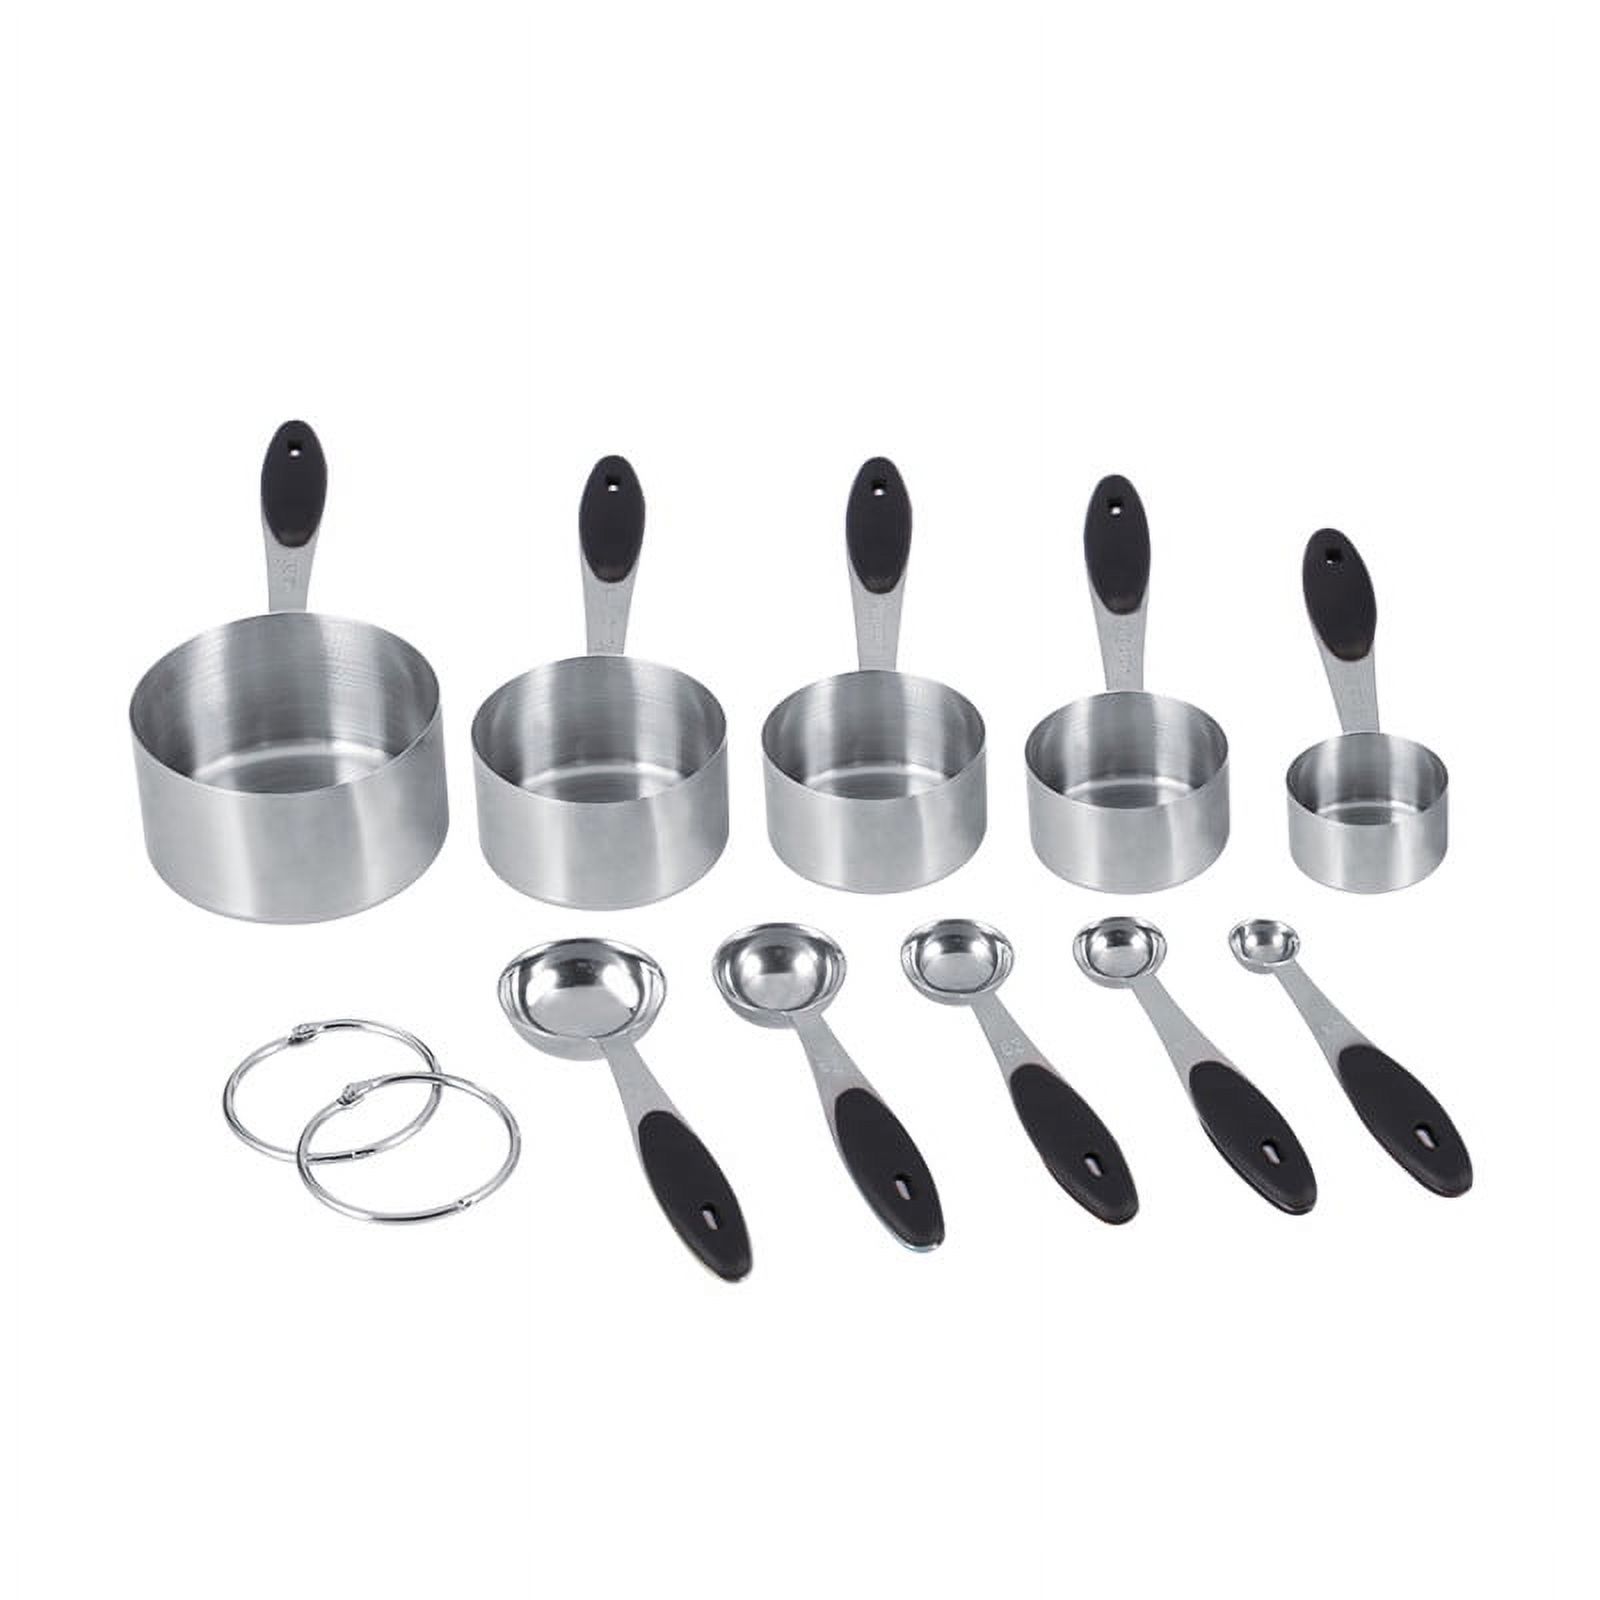 FAGINEY 10 Piece Measuring Cups and Spoons Set in 18/8 Stainless Steel 5 Measuring Cups & 5 Measuring Spoons with Silicone Handles for Baking Accessories (Black) - image 1 of 9